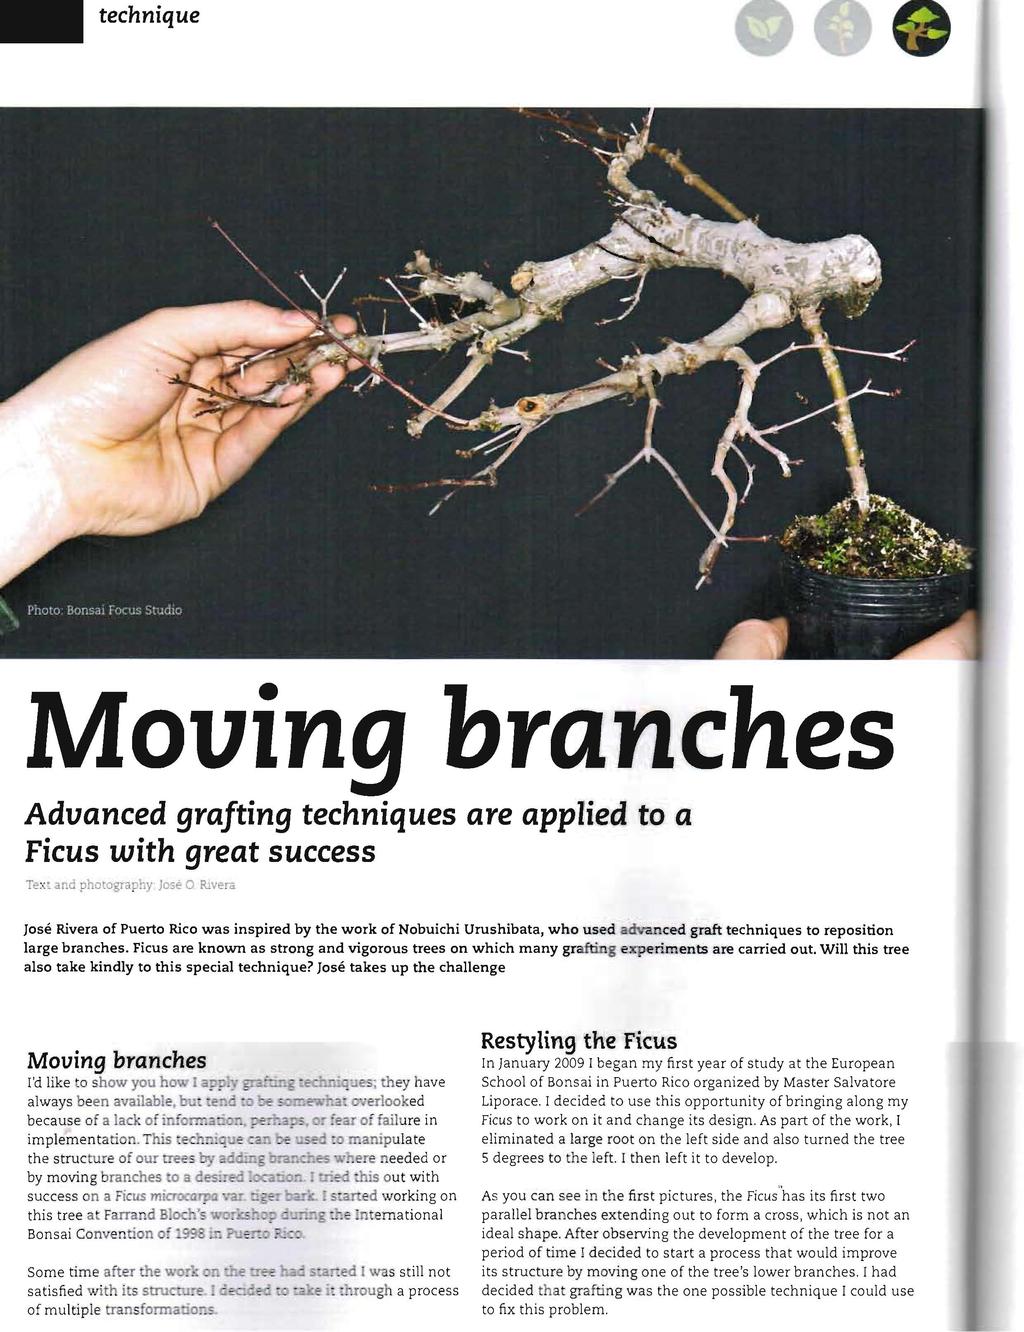 technique Moving branches Advanced grafting techniques are applied to a Ficus with great success Tex: and photography JosE 0 RIvera Jose Rivera of Puerto Rico was inspired by the work of Nobuichi